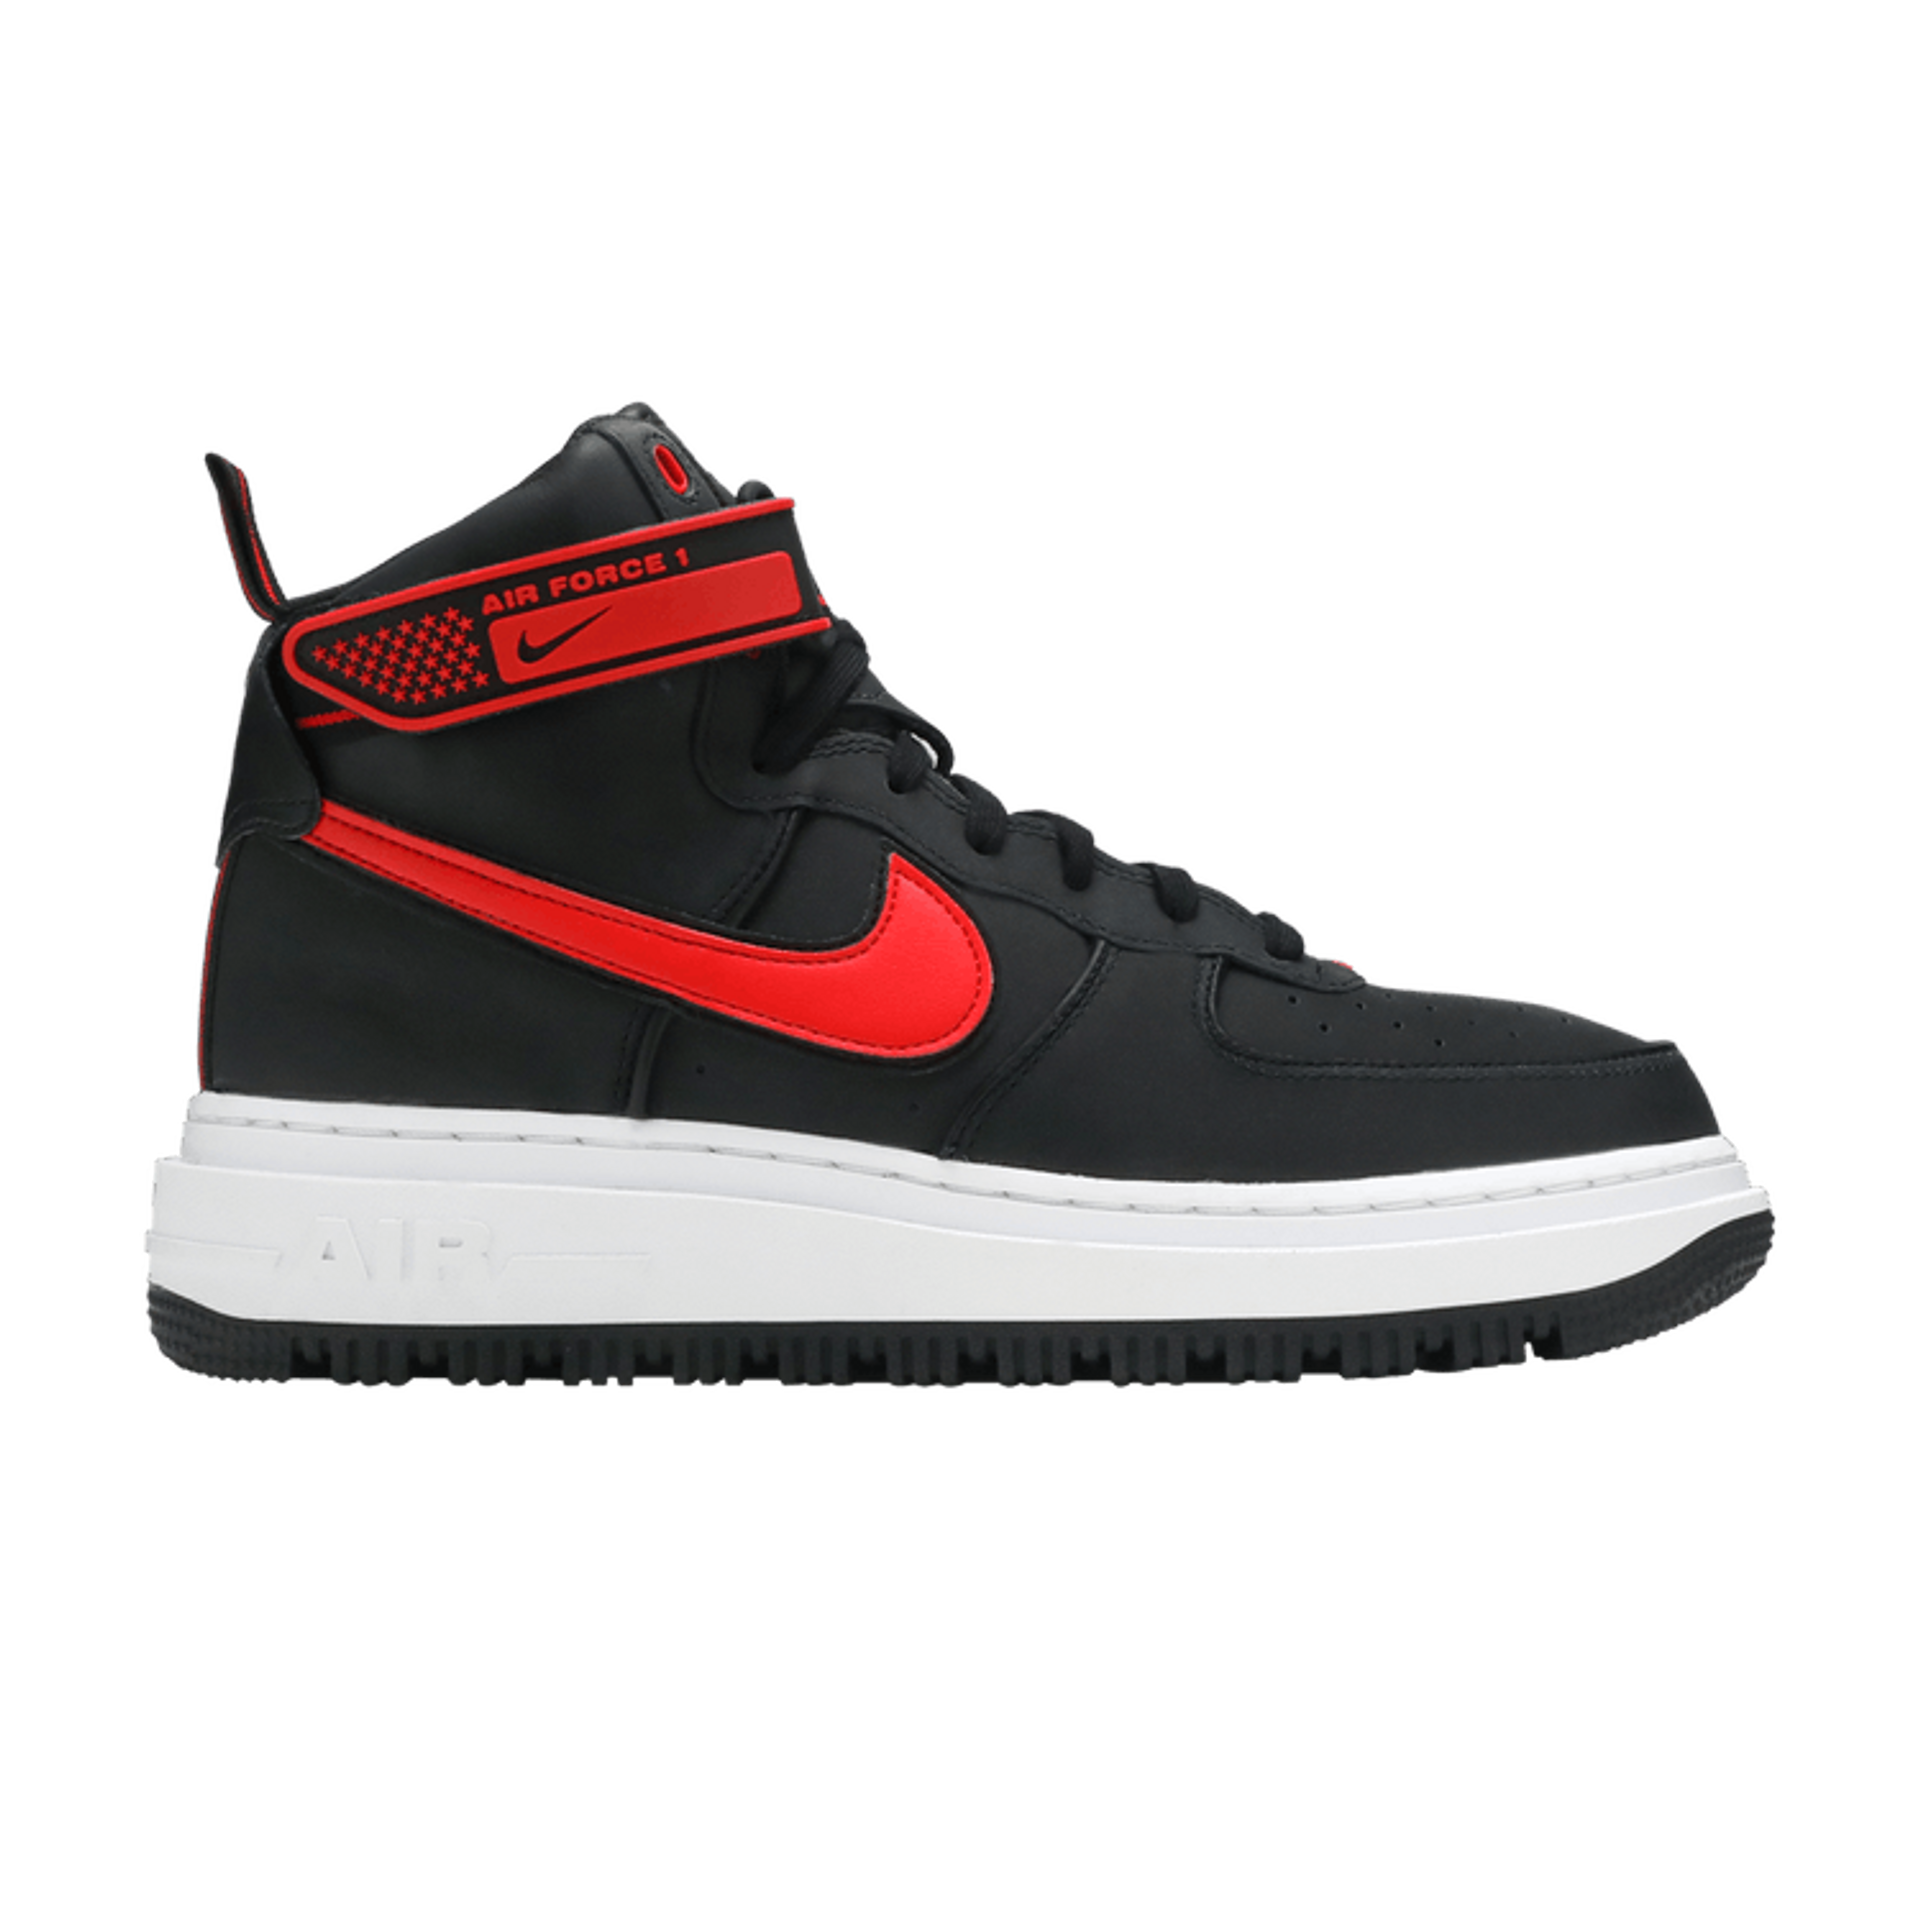 Air Force 1 Boot 'Black University Red'